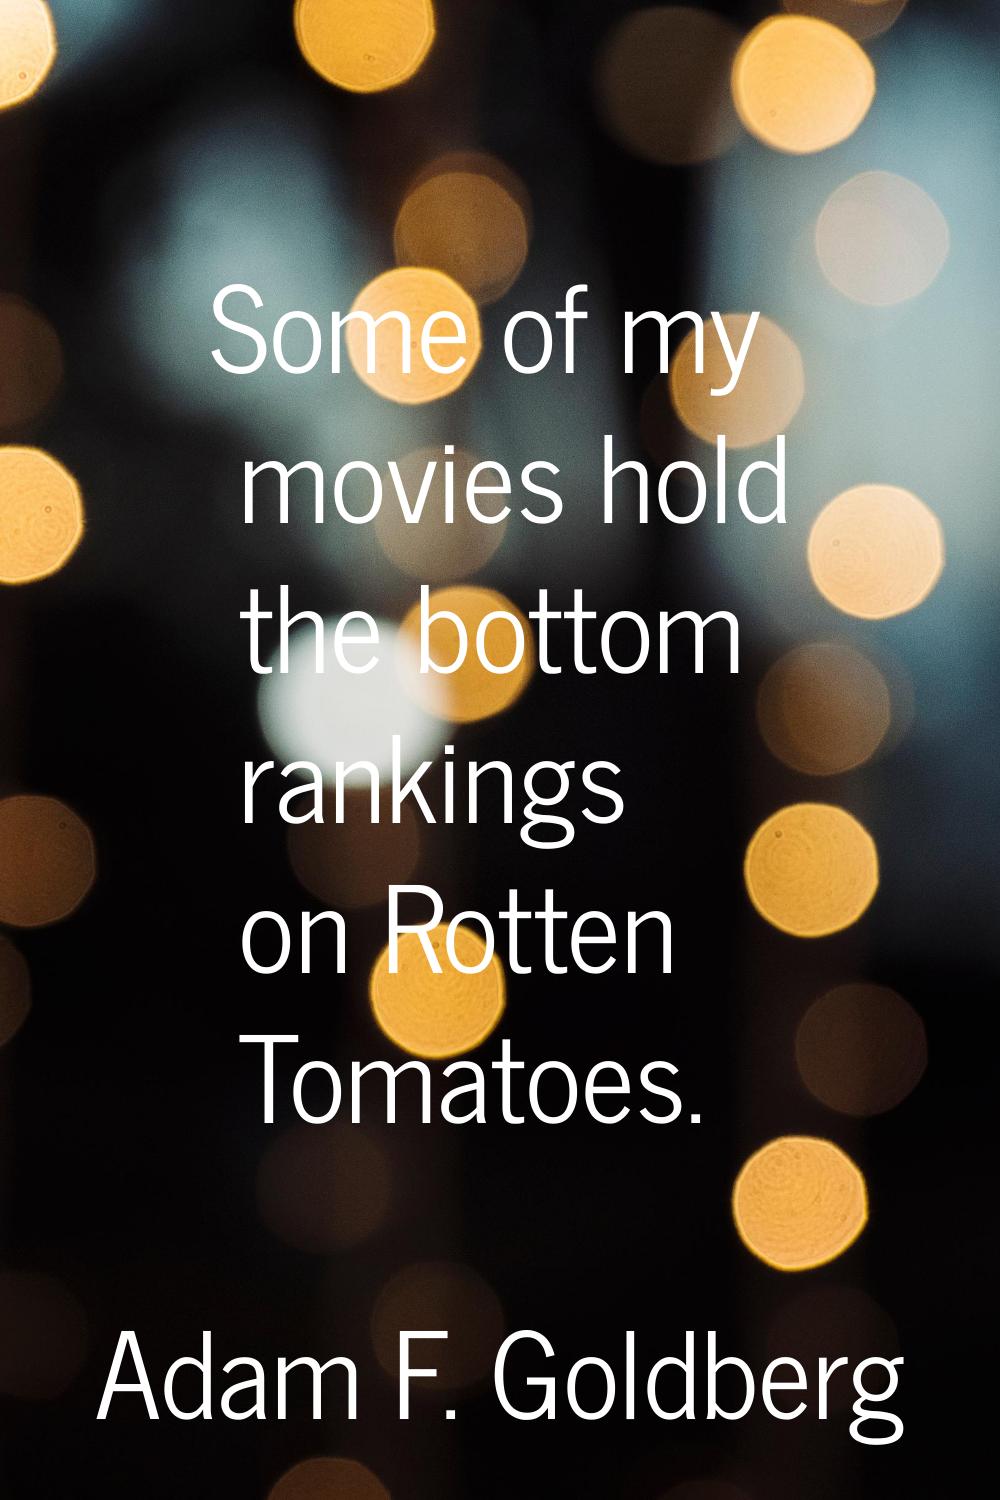 Some of my movies hold the bottom rankings on Rotten Tomatoes.